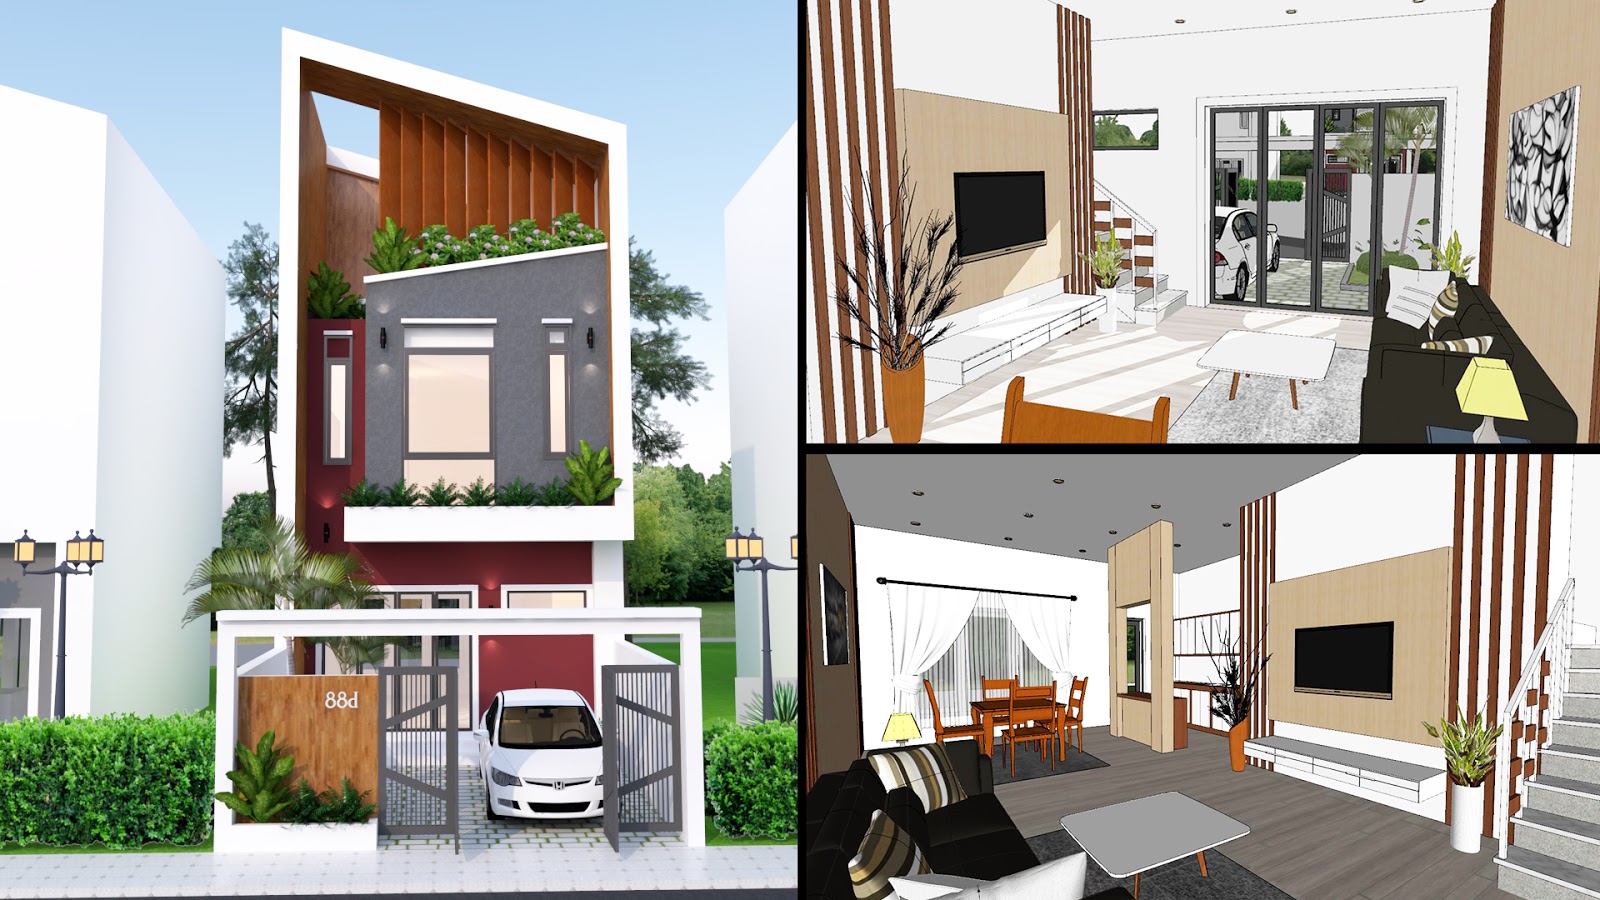  Sketchup  Small  House  Design Plan  5 6x8 with Interior 3 